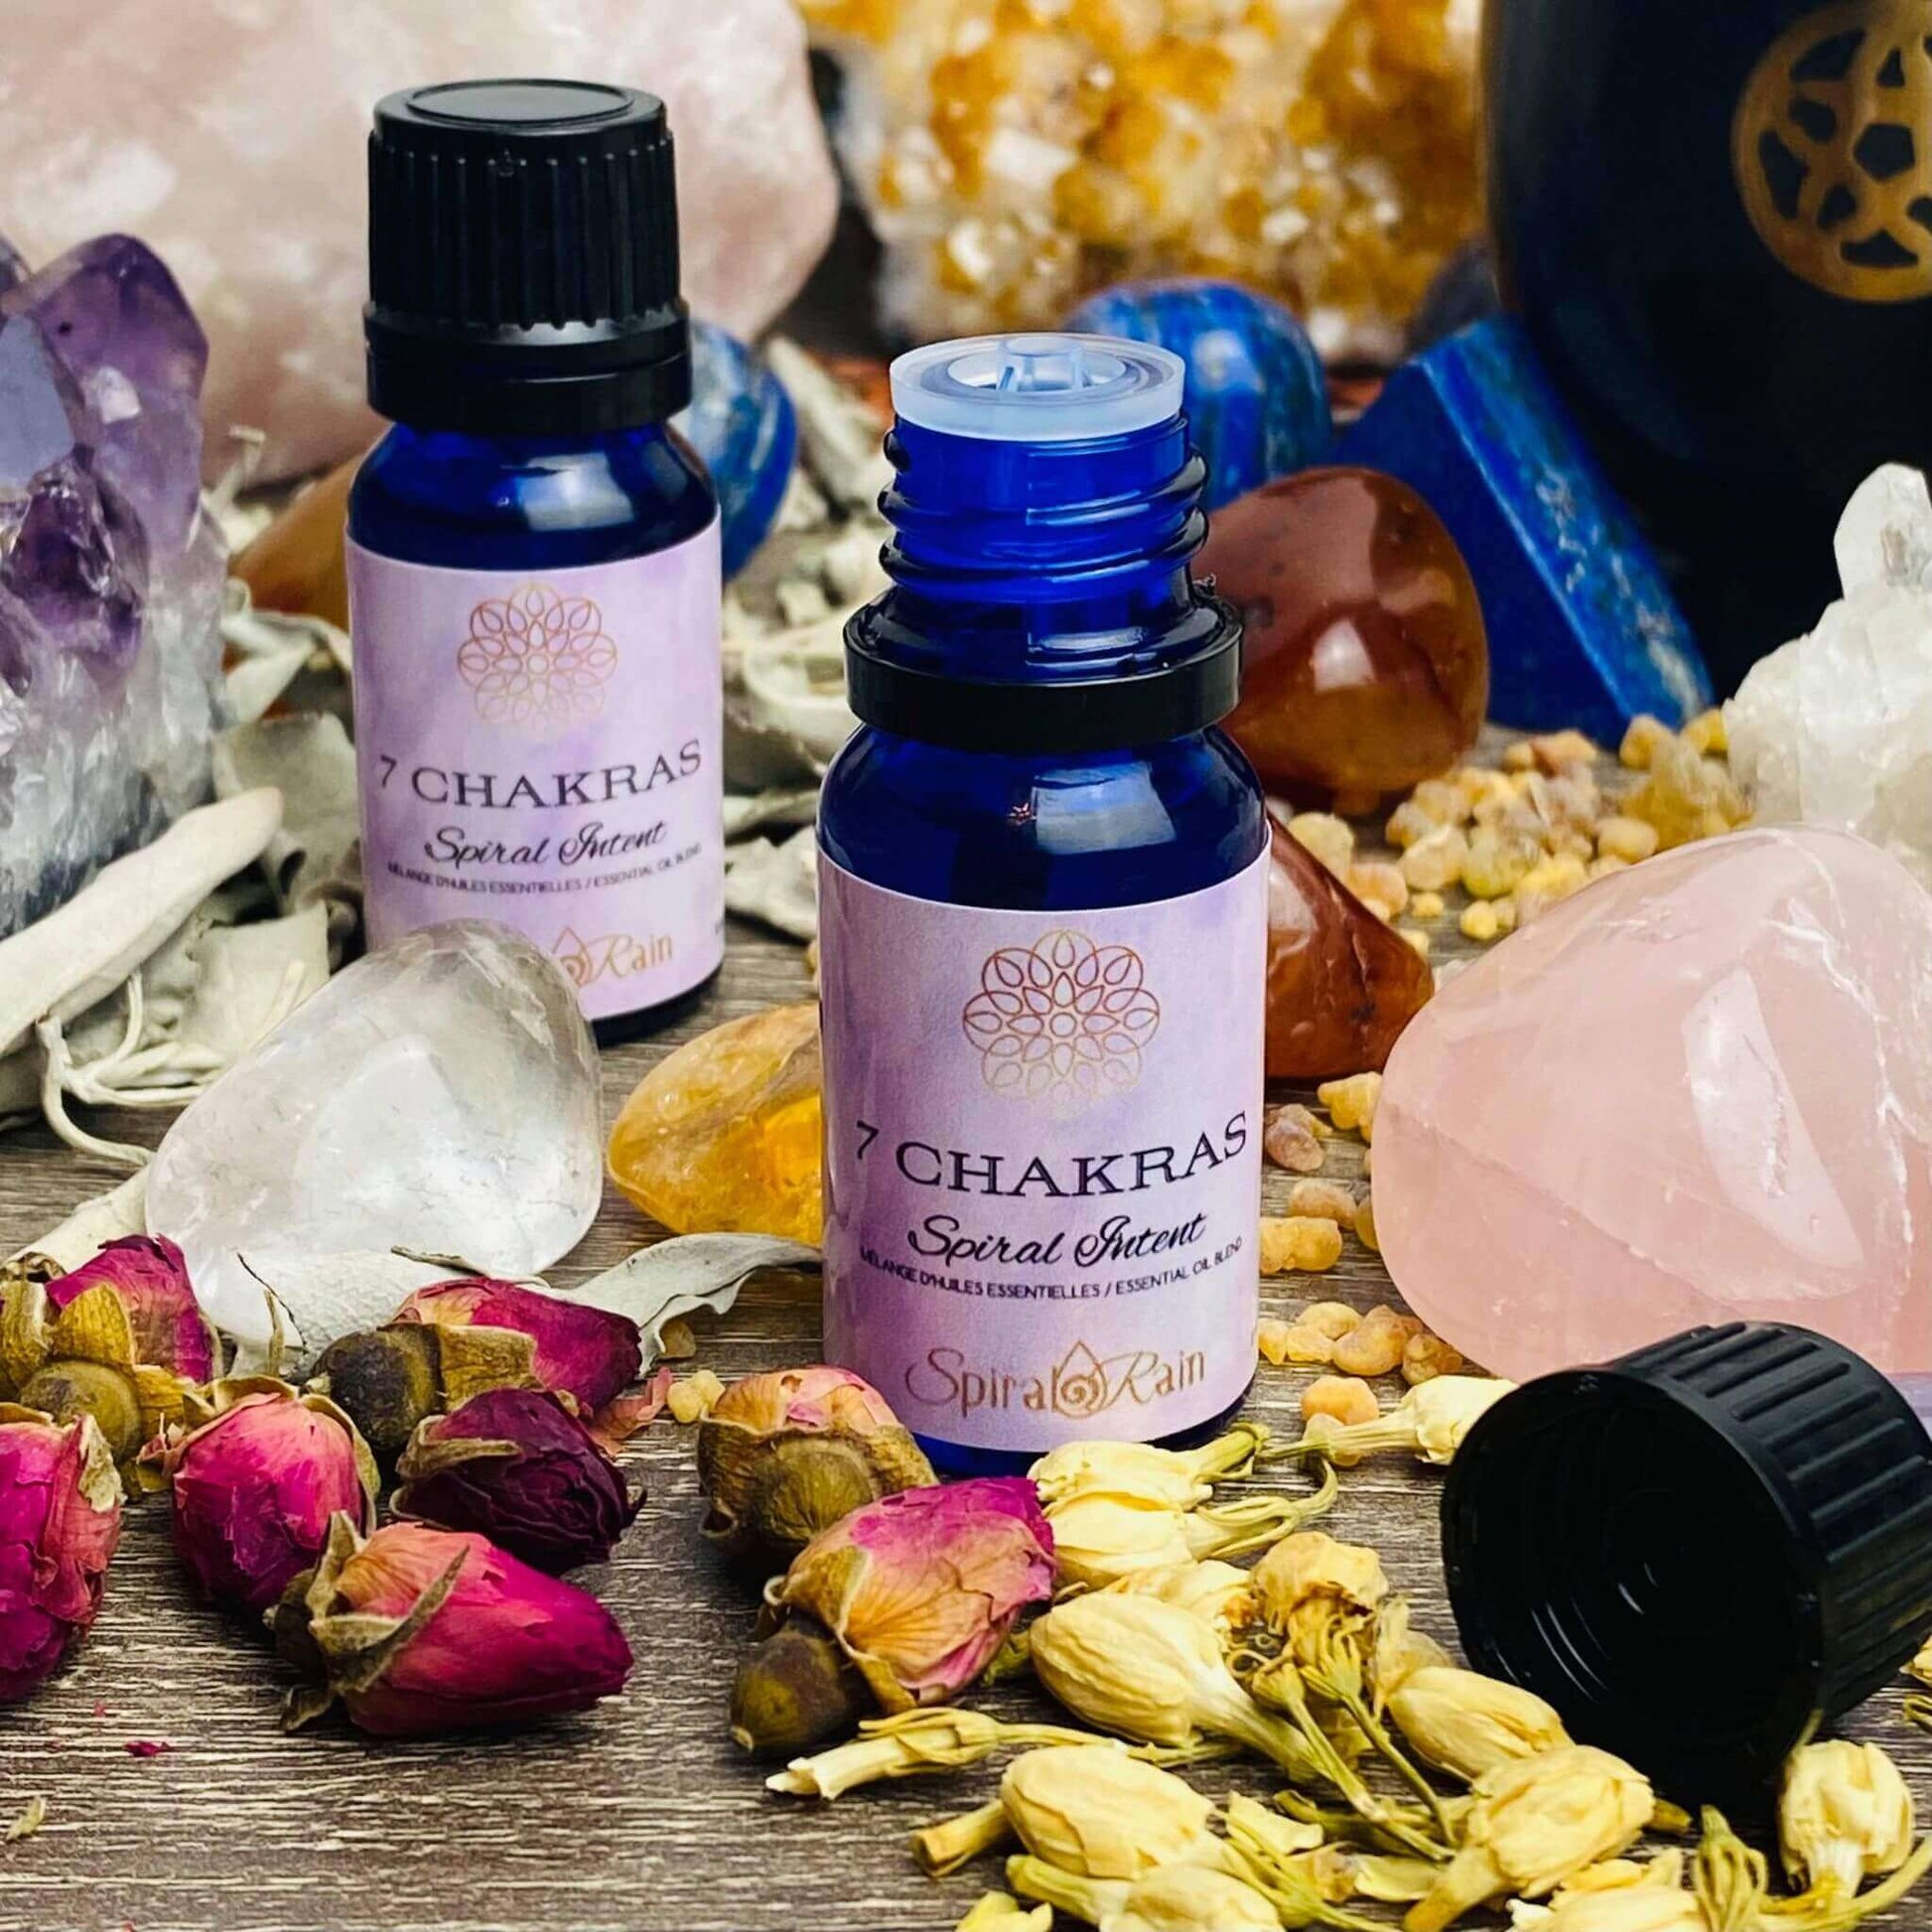 7 Chakras oil and Perfume 10 ml at $15 only from Spiral Rain